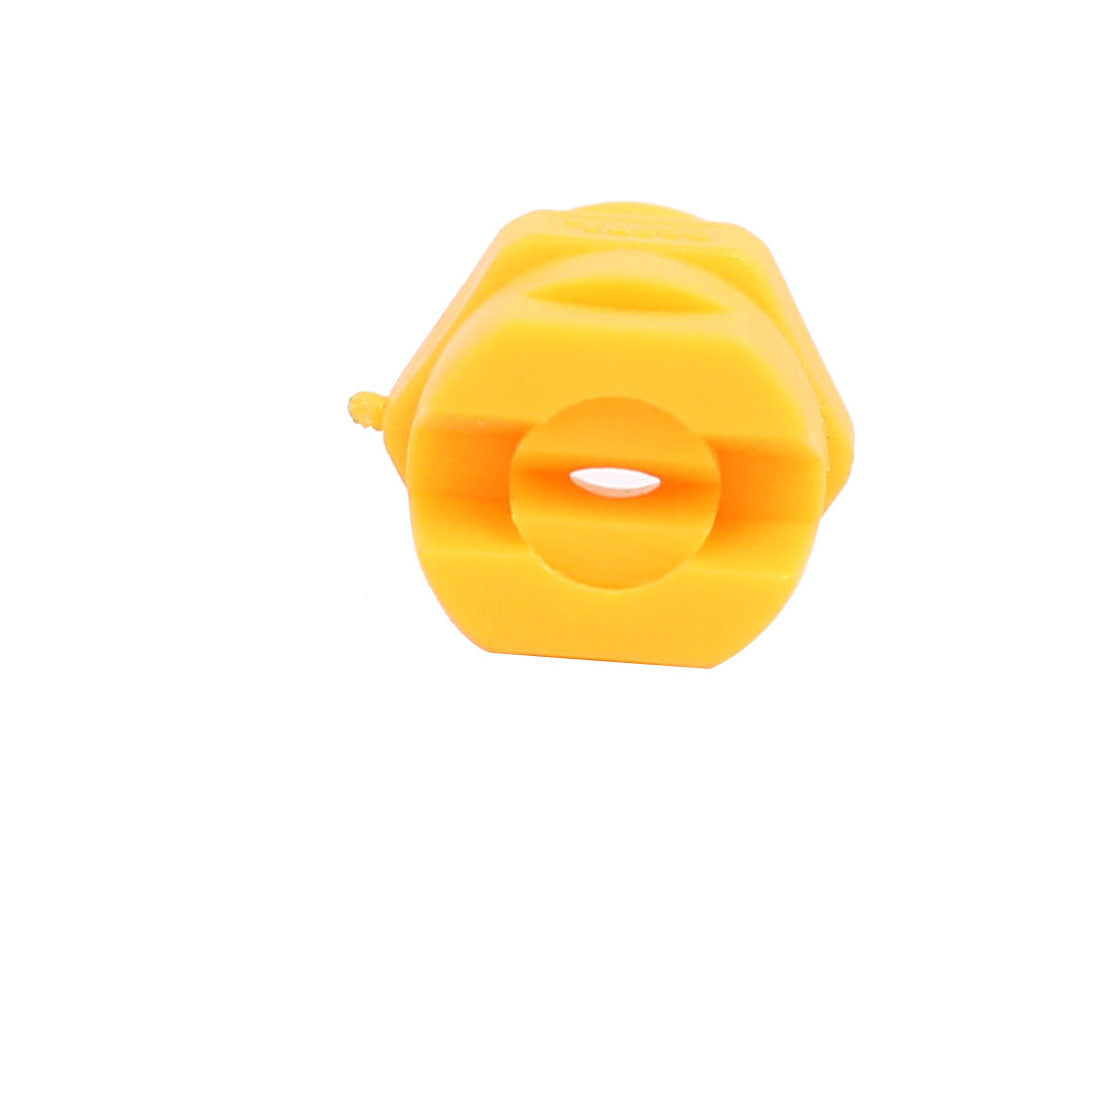 uxcell Uxcell 1/4PT Male Inlet 65 Degree Standard Flat Fan Spray Tip Yellow 5pcs